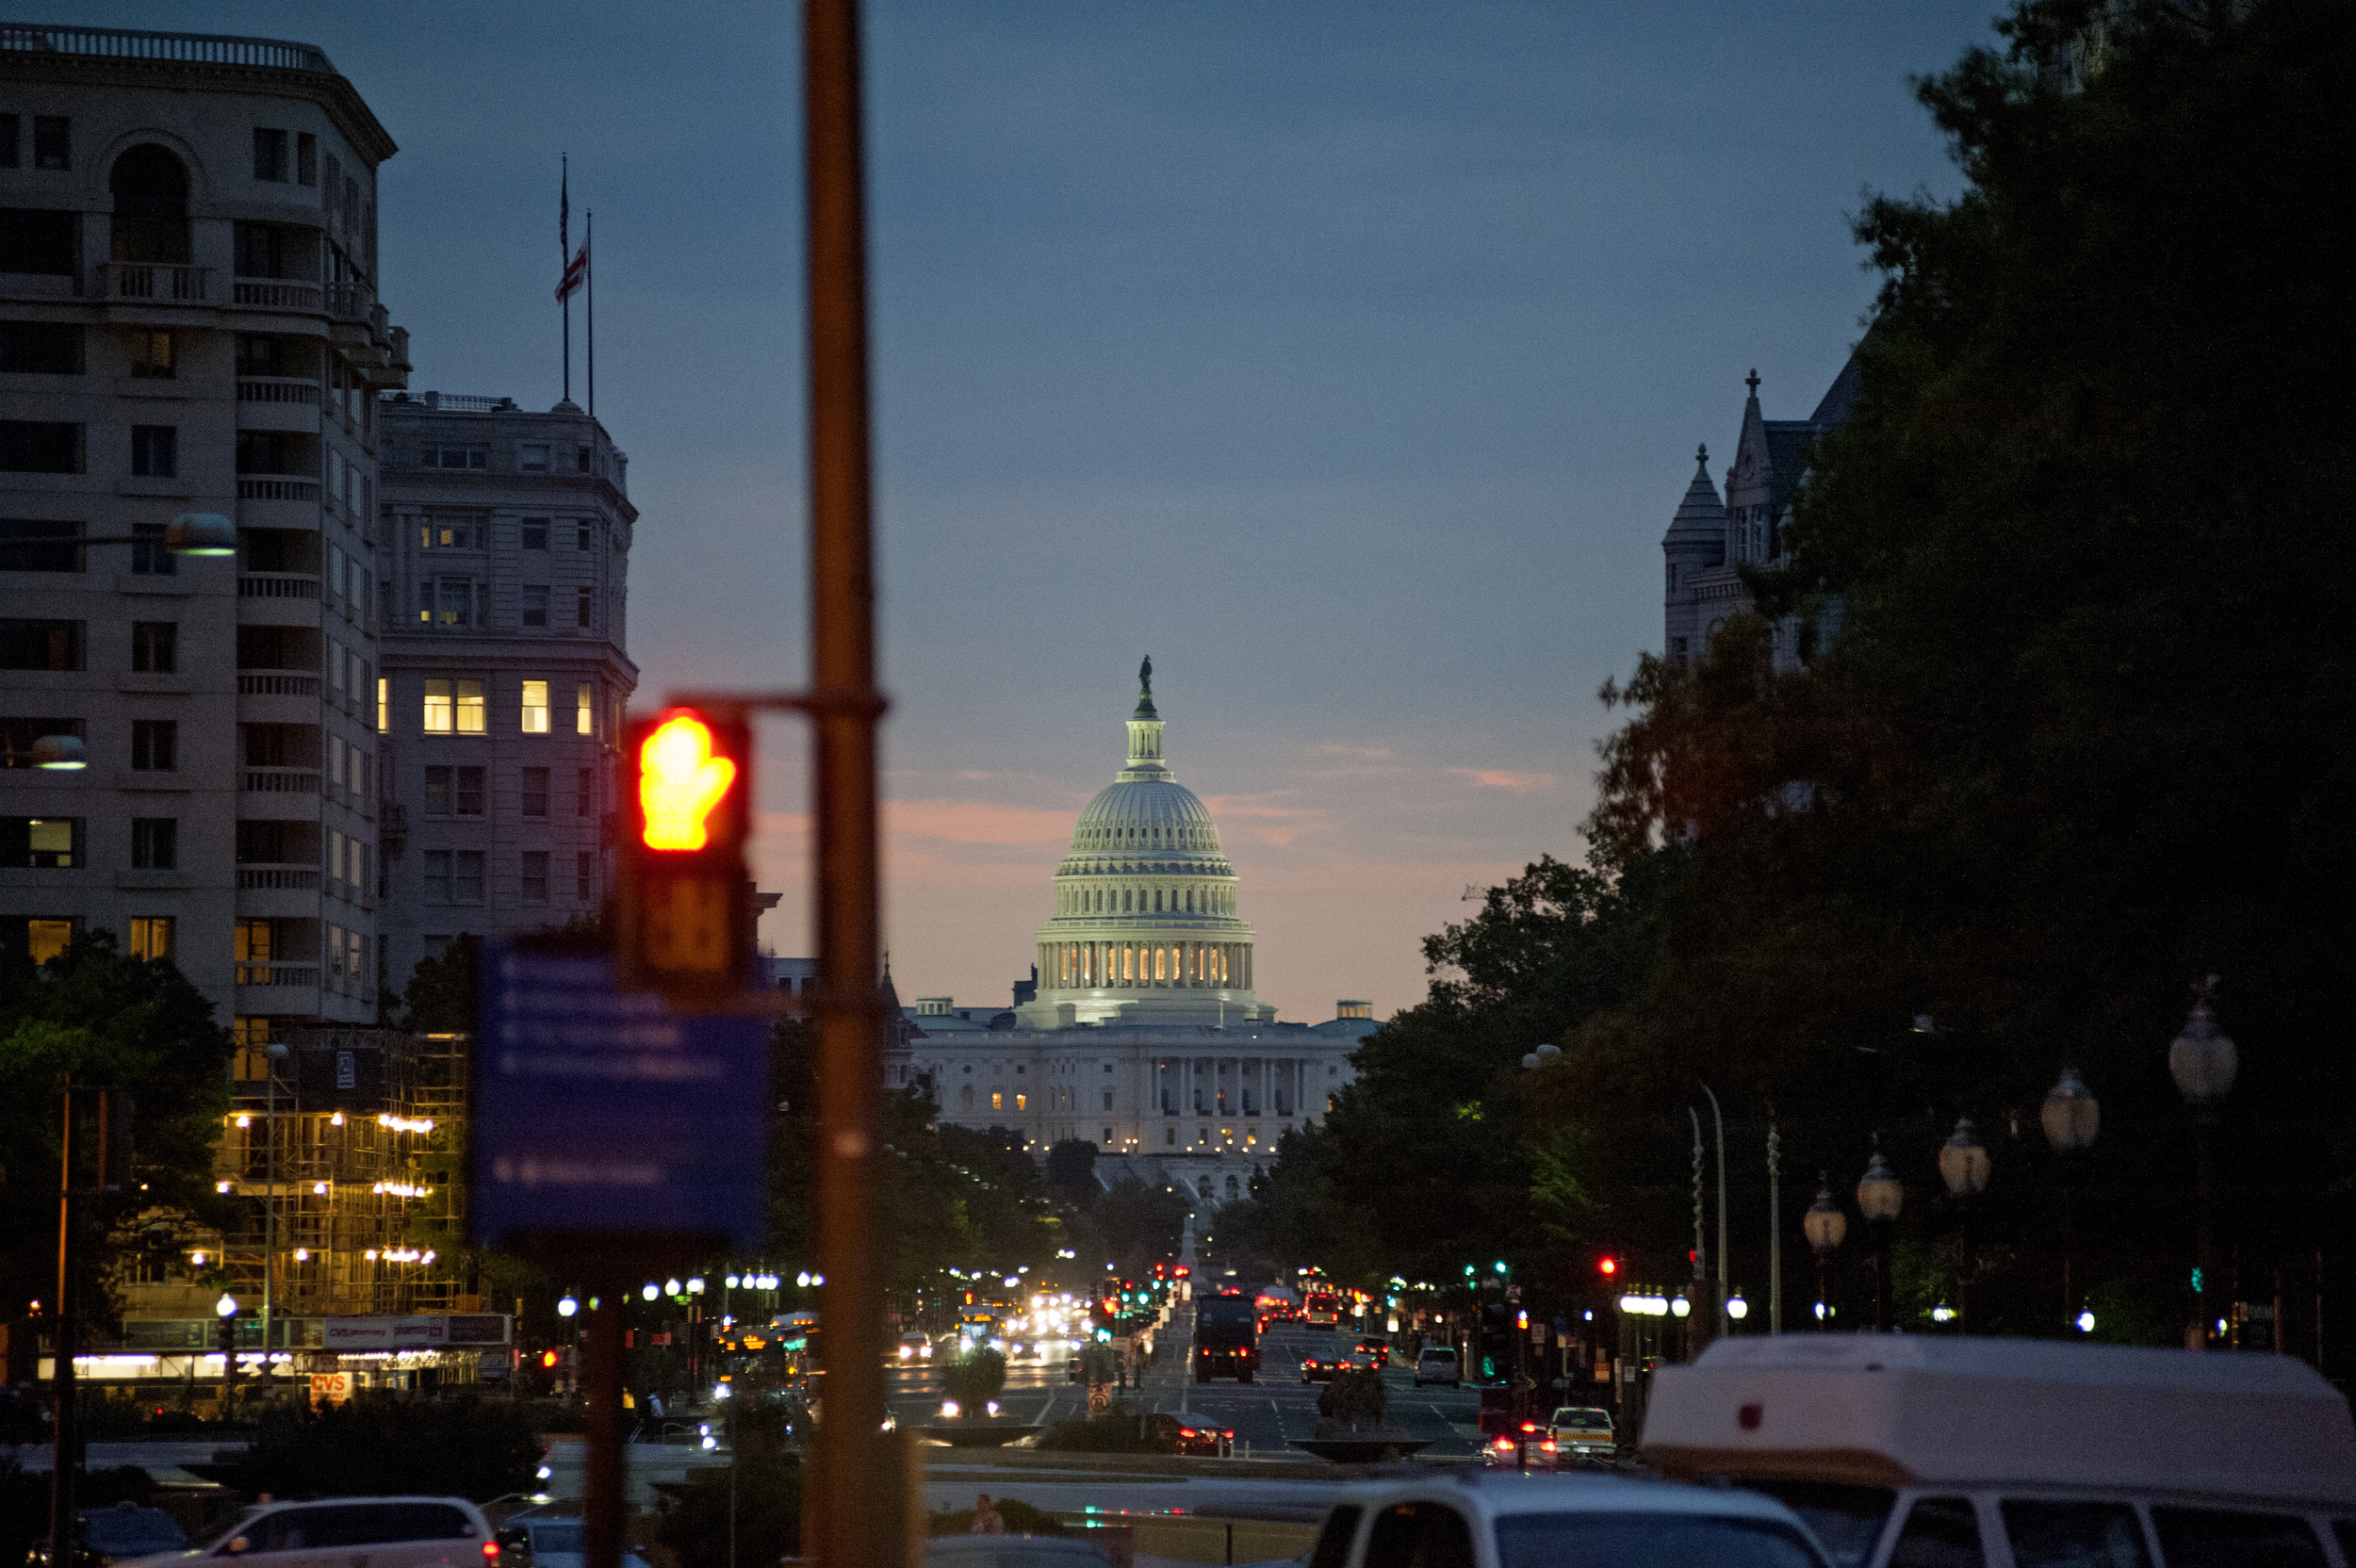  The sun rises behind the Capitol on October 1st during the Government Shutdown.  (Photo by Marlon Correa/The Washington Post) 